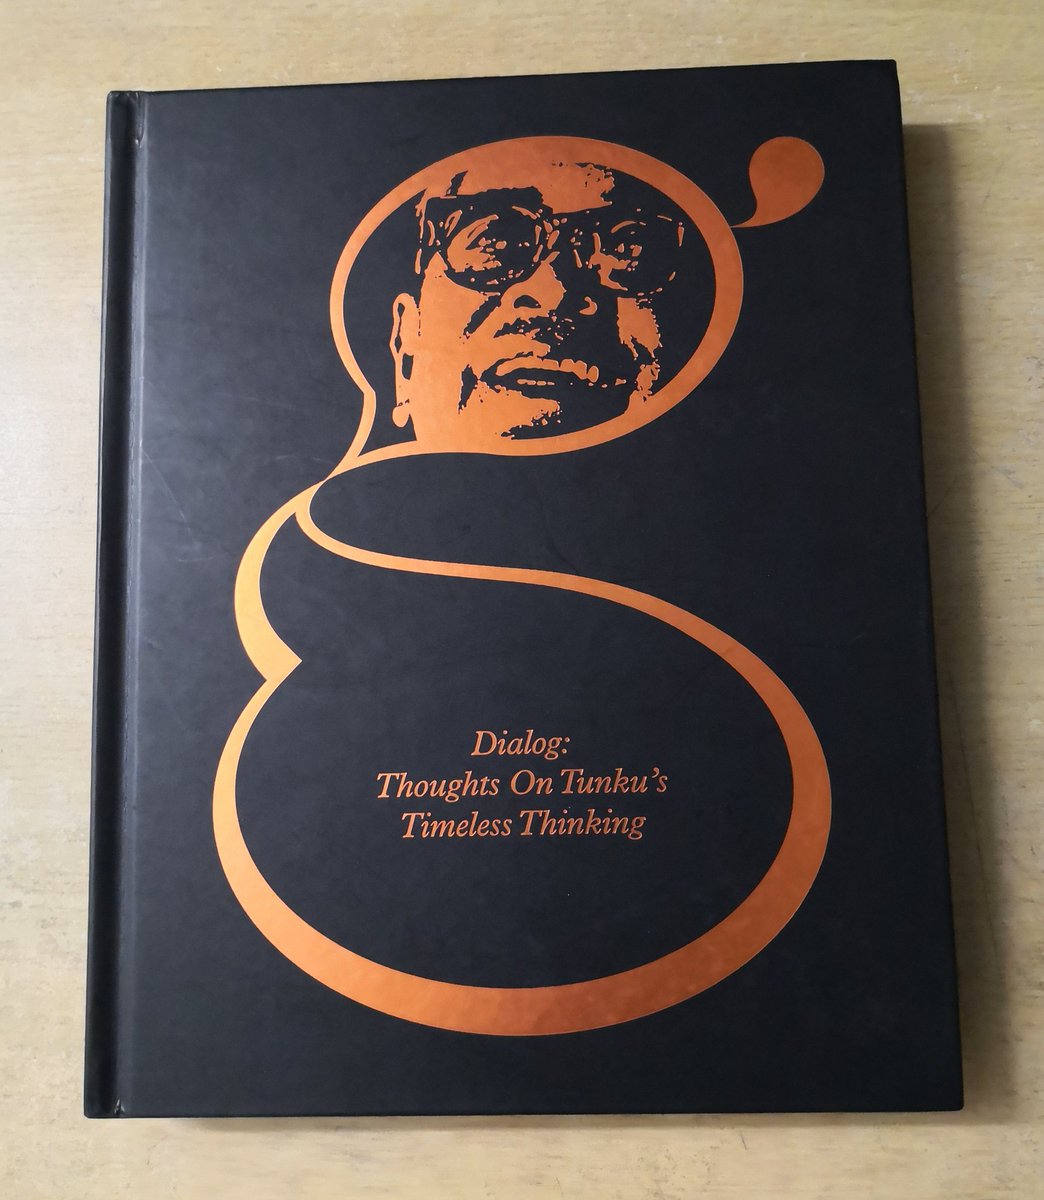 Have spent d last few days on "Dialog: Thoughts on Tunku's Timeless Thinking".What a remarkable & visually stunning memoir of Tunku Abdul Rahman. Here are 10 insightful nuggets of wisdom from d book.Hopefully it will spread some positivity in this trying times for .